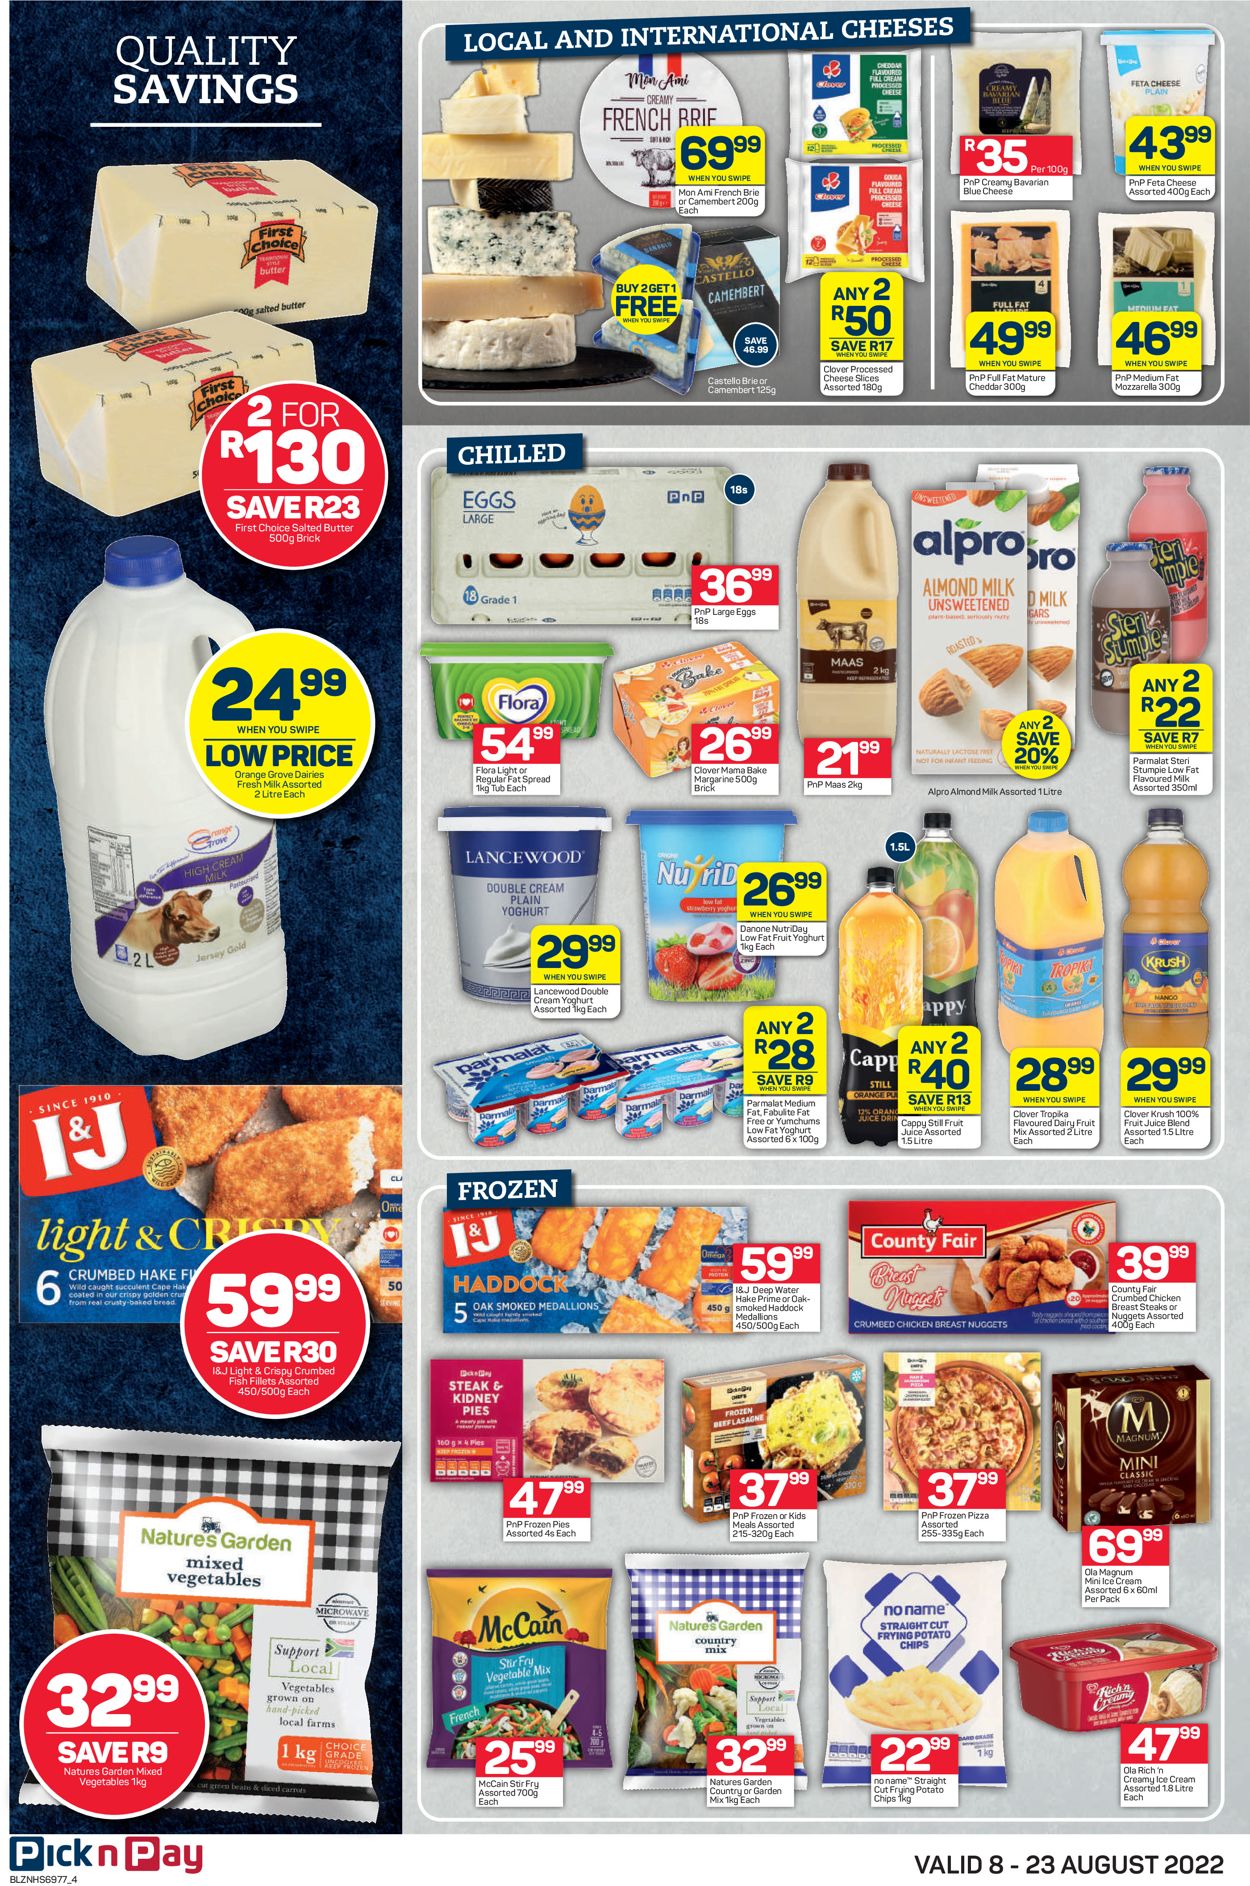 Pick n Pay Catalogue - 2022/08/08-2022/08/23 (Page 4)